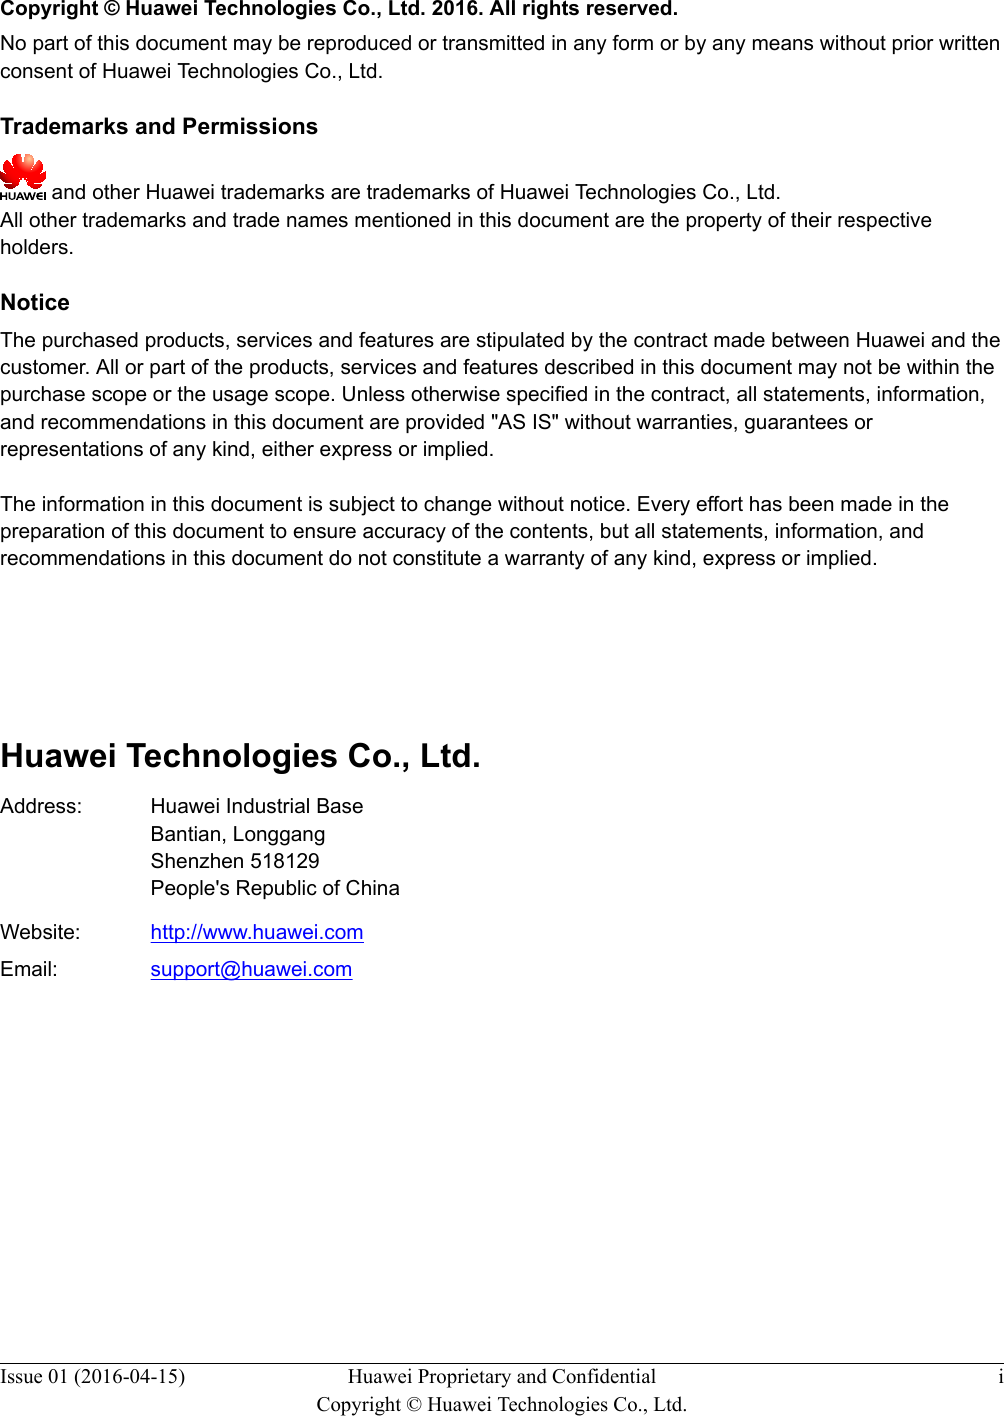   Copyright © Huawei Technologies Co., Ltd. 2016. All rights reserved.No part of this document may be reproduced or transmitted in any form or by any means without prior writtenconsent of Huawei Technologies Co., Ltd. Trademarks and Permissions and other Huawei trademarks are trademarks of Huawei Technologies Co., Ltd.All other trademarks and trade names mentioned in this document are the property of their respectiveholders. NoticeThe purchased products, services and features are stipulated by the contract made between Huawei and thecustomer. All or part of the products, services and features described in this document may not be within thepurchase scope or the usage scope. Unless otherwise specified in the contract, all statements, information,and recommendations in this document are provided &quot;AS IS&quot; without warranties, guarantees orrepresentations of any kind, either express or implied.The information in this document is subject to change without notice. Every effort has been made in thepreparation of this document to ensure accuracy of the contents, but all statements, information, andrecommendations in this document do not constitute a warranty of any kind, express or implied.        Huawei Technologies Co., Ltd.Address: Huawei Industrial BaseBantian, LonggangShenzhen 518129People&apos;s Republic of ChinaWebsite: http://www.huawei.comEmail: support@huawei.comIssue 01 (2016-04-15) Huawei Proprietary and ConfidentialCopyright © Huawei Technologies Co., Ltd.i